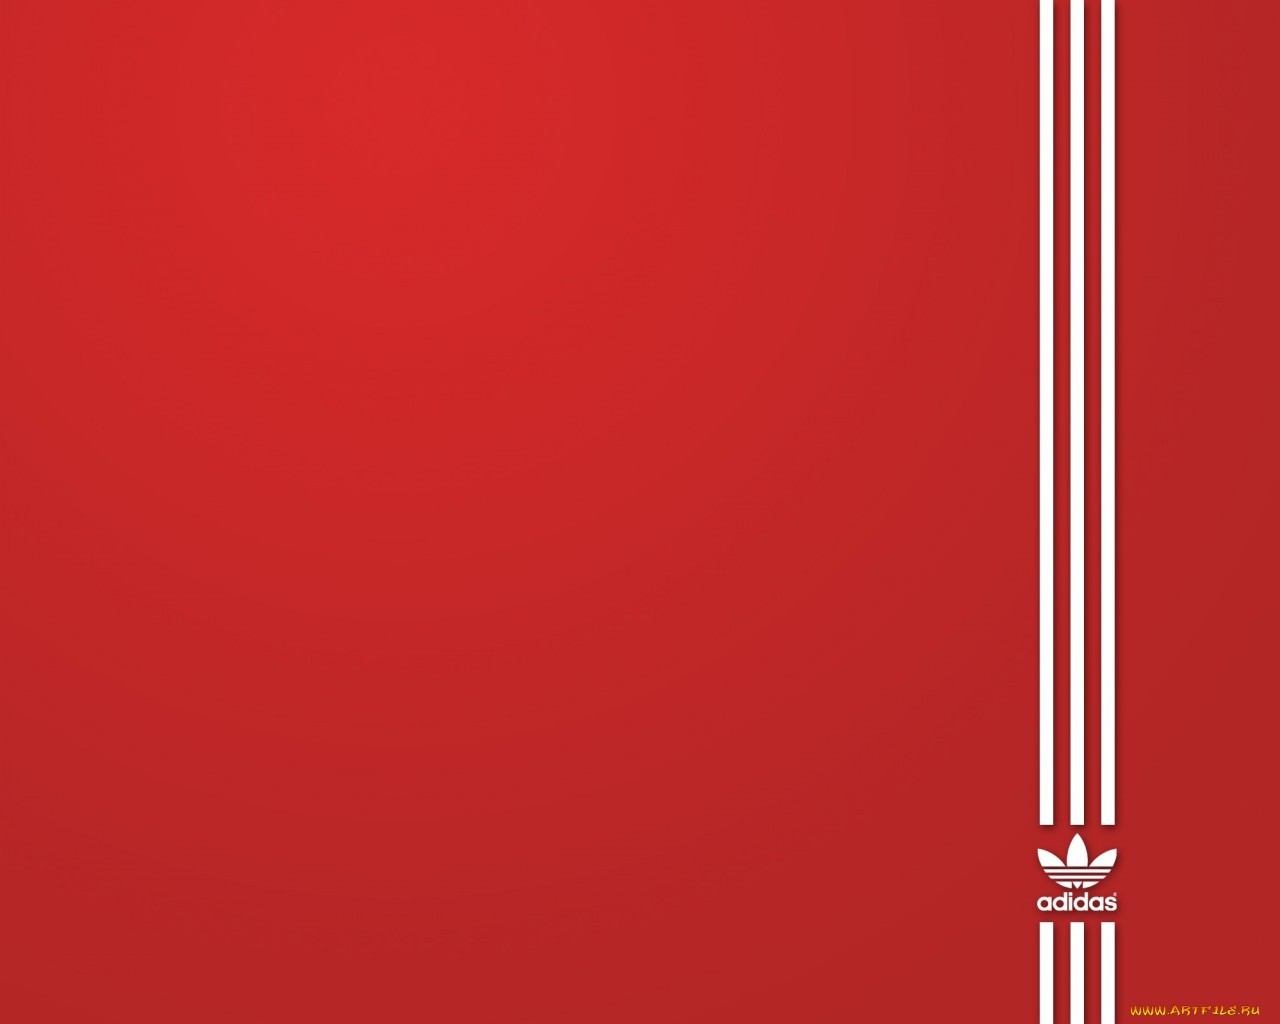 adidas, brands, logos, background, red mobile wallpaper